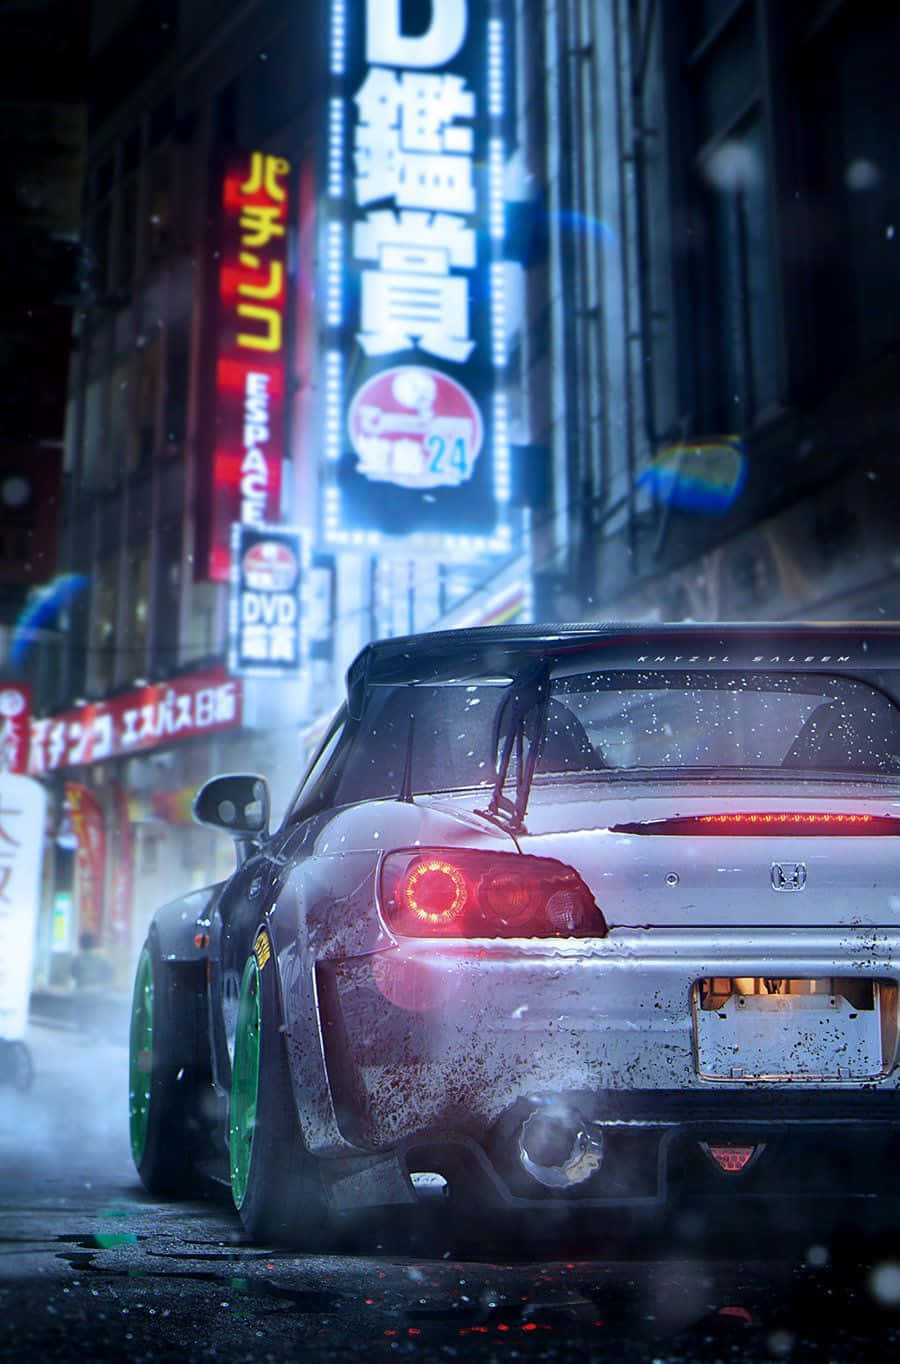 Enjoy surfing the internet in style with the JDM iPhone Wallpaper